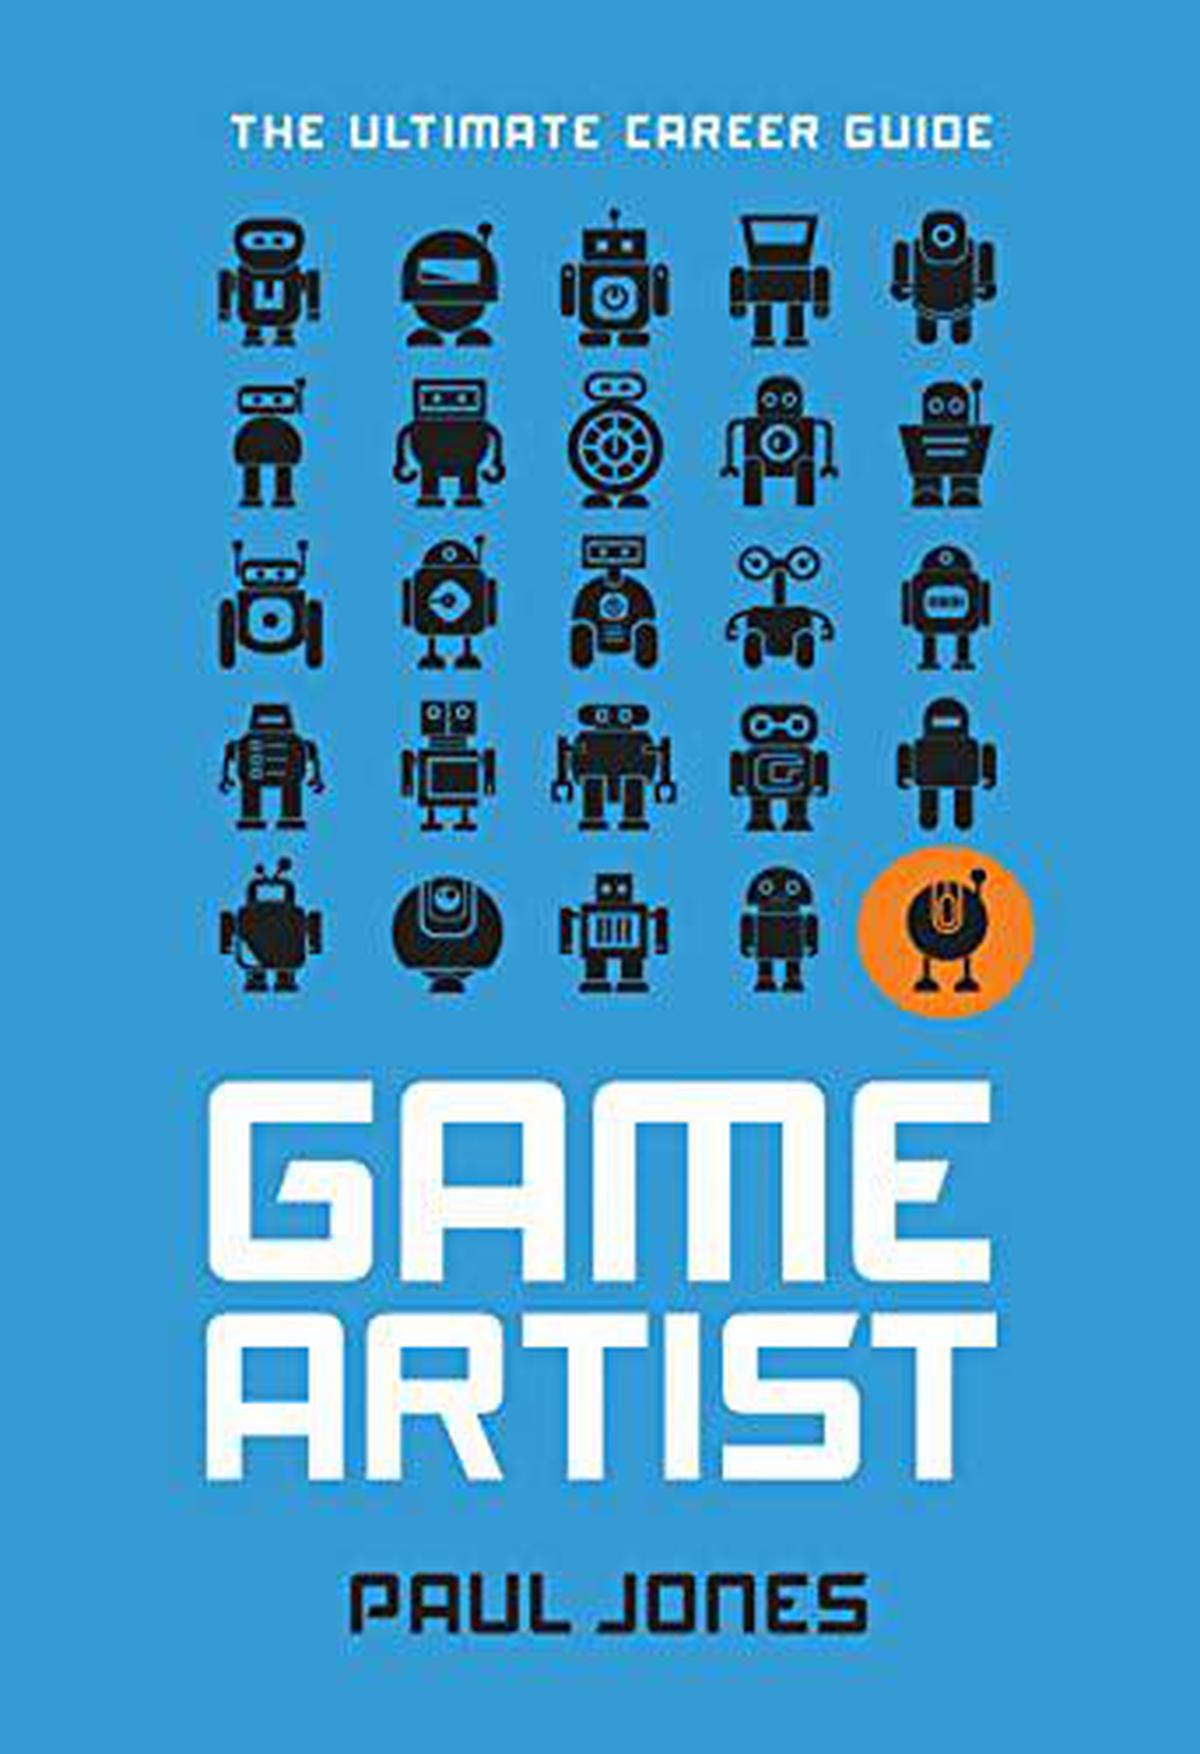 Cover of ‘The Ultimate Career Guide: Game Artist’ by Paul Jones